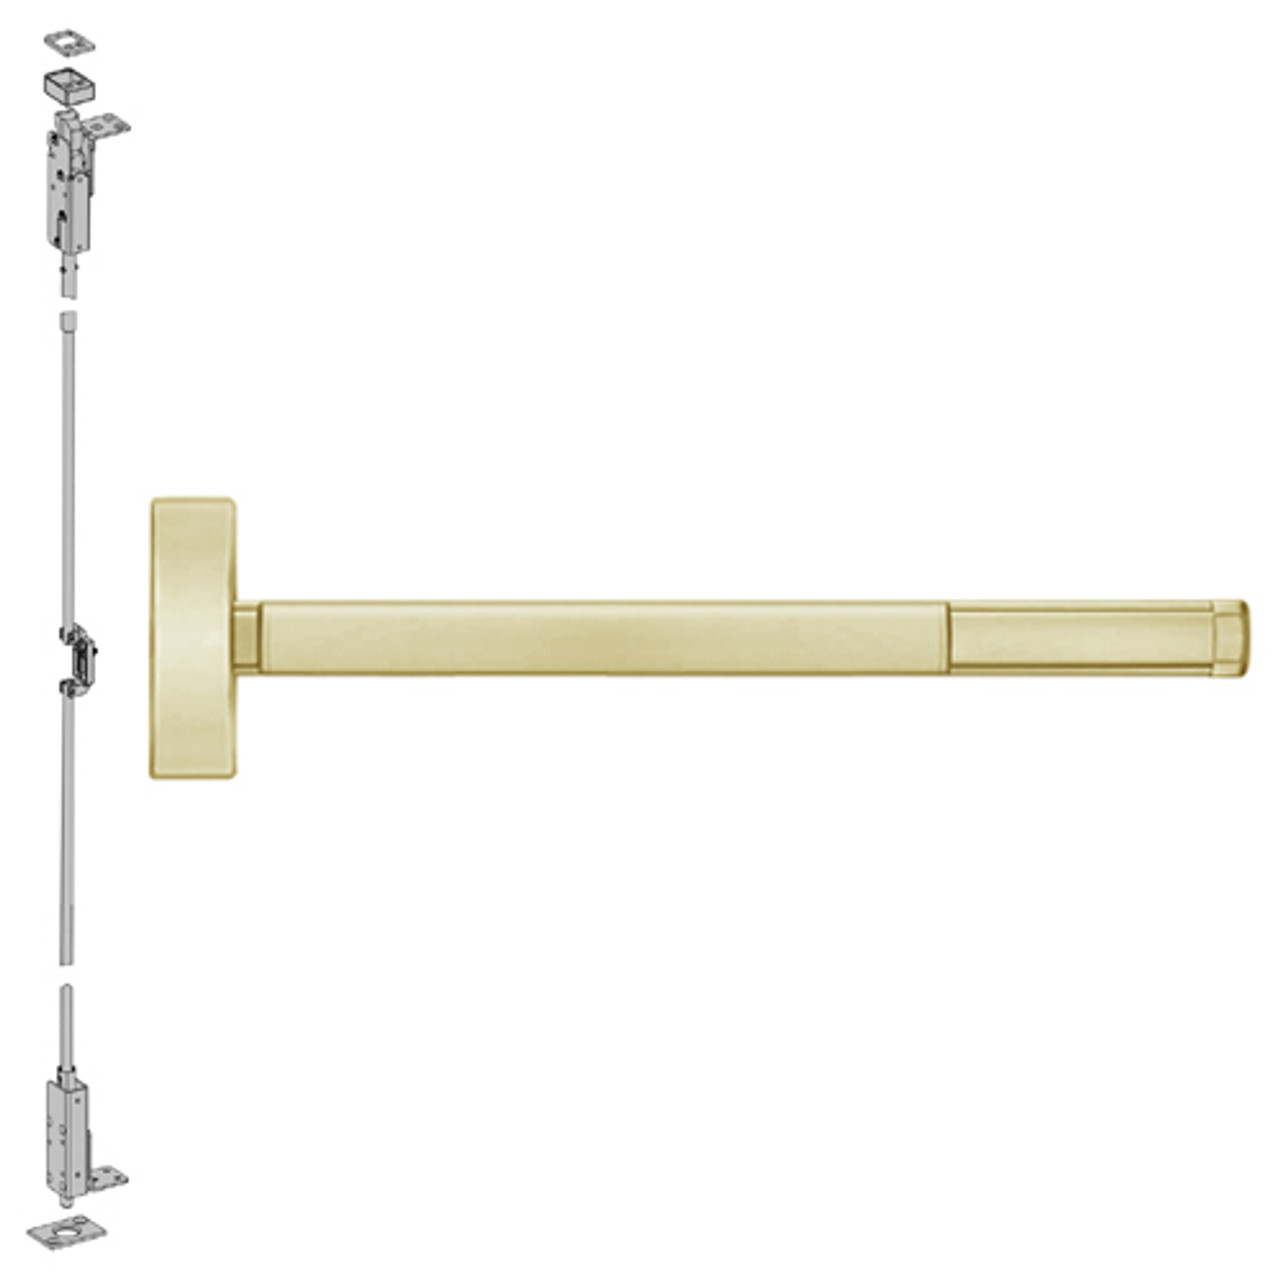 DEFL2705-606-36 PHI 2700 Series Fire Rated Wood Door Concealed Vertical Exit Device with Delayed Egress Prepped for Key Controls Thumb Piece in Satin Brass Finish